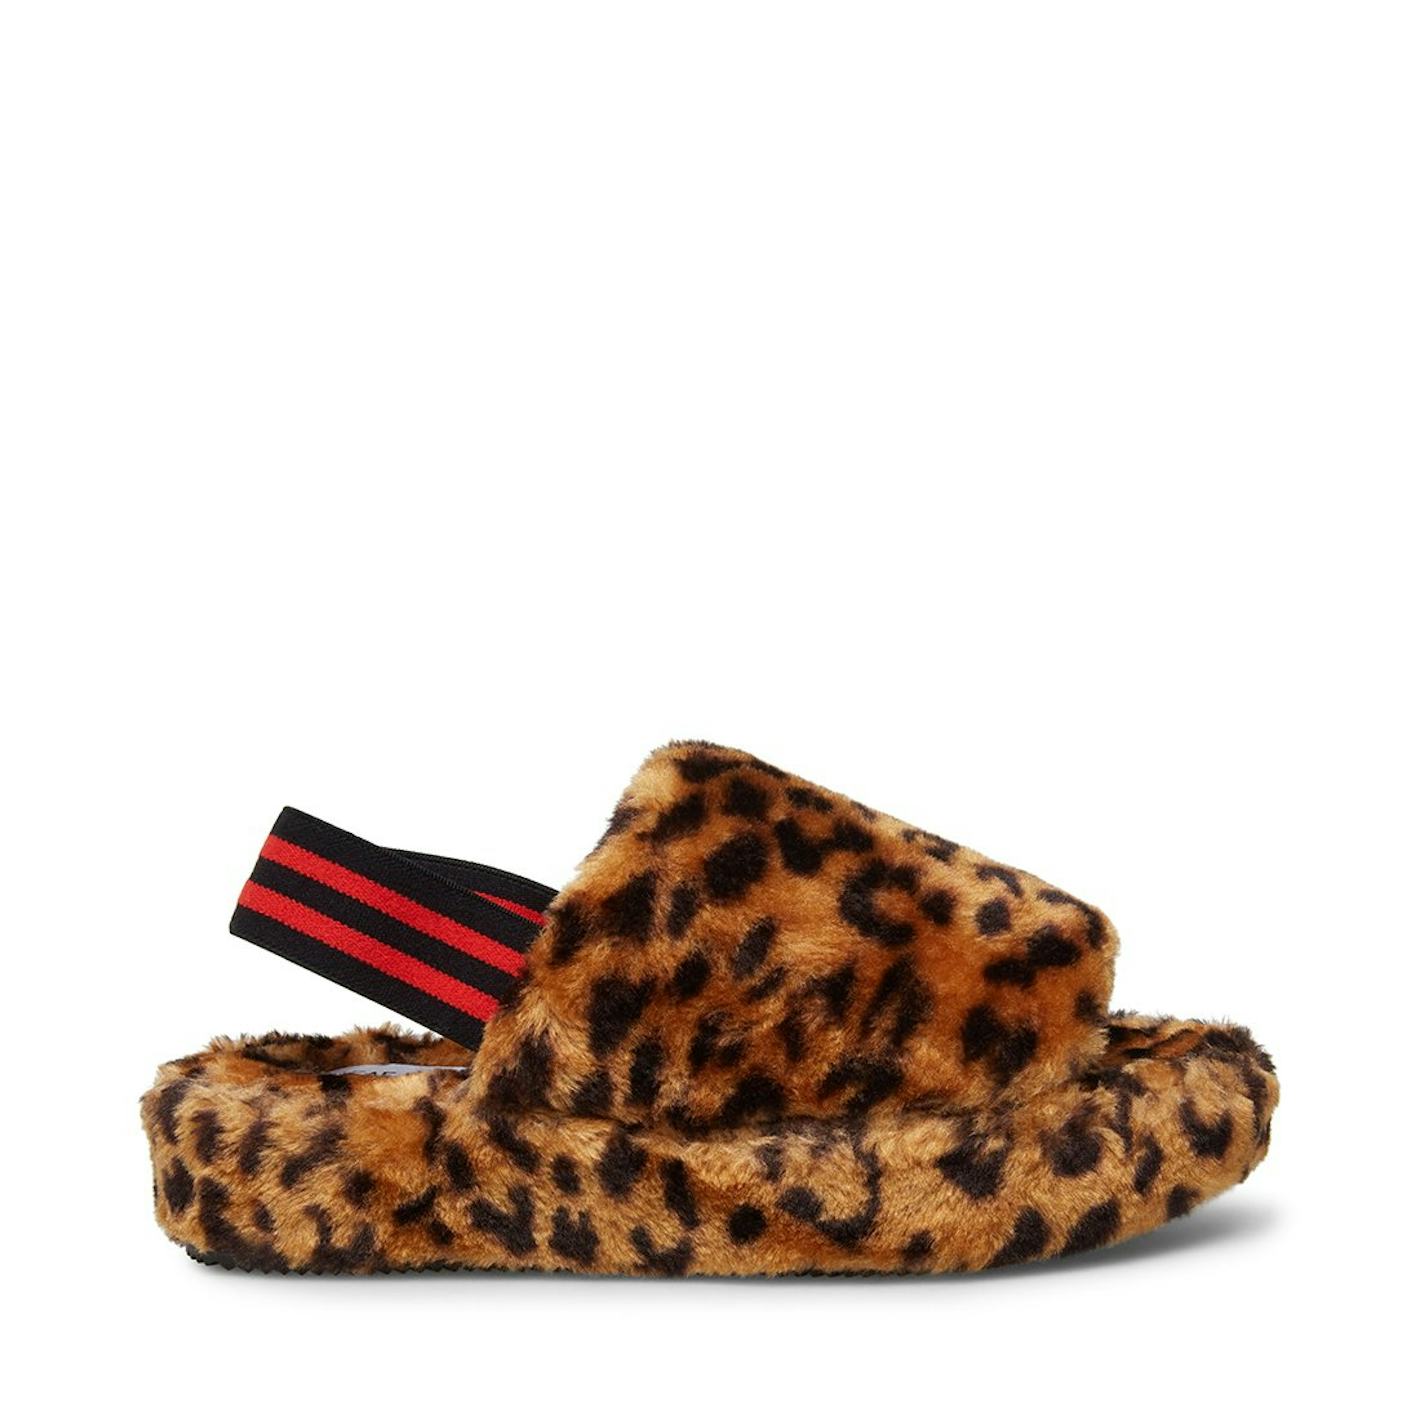 Ugg sues serial knockoff artist Steve Madden for copying its furry slipper